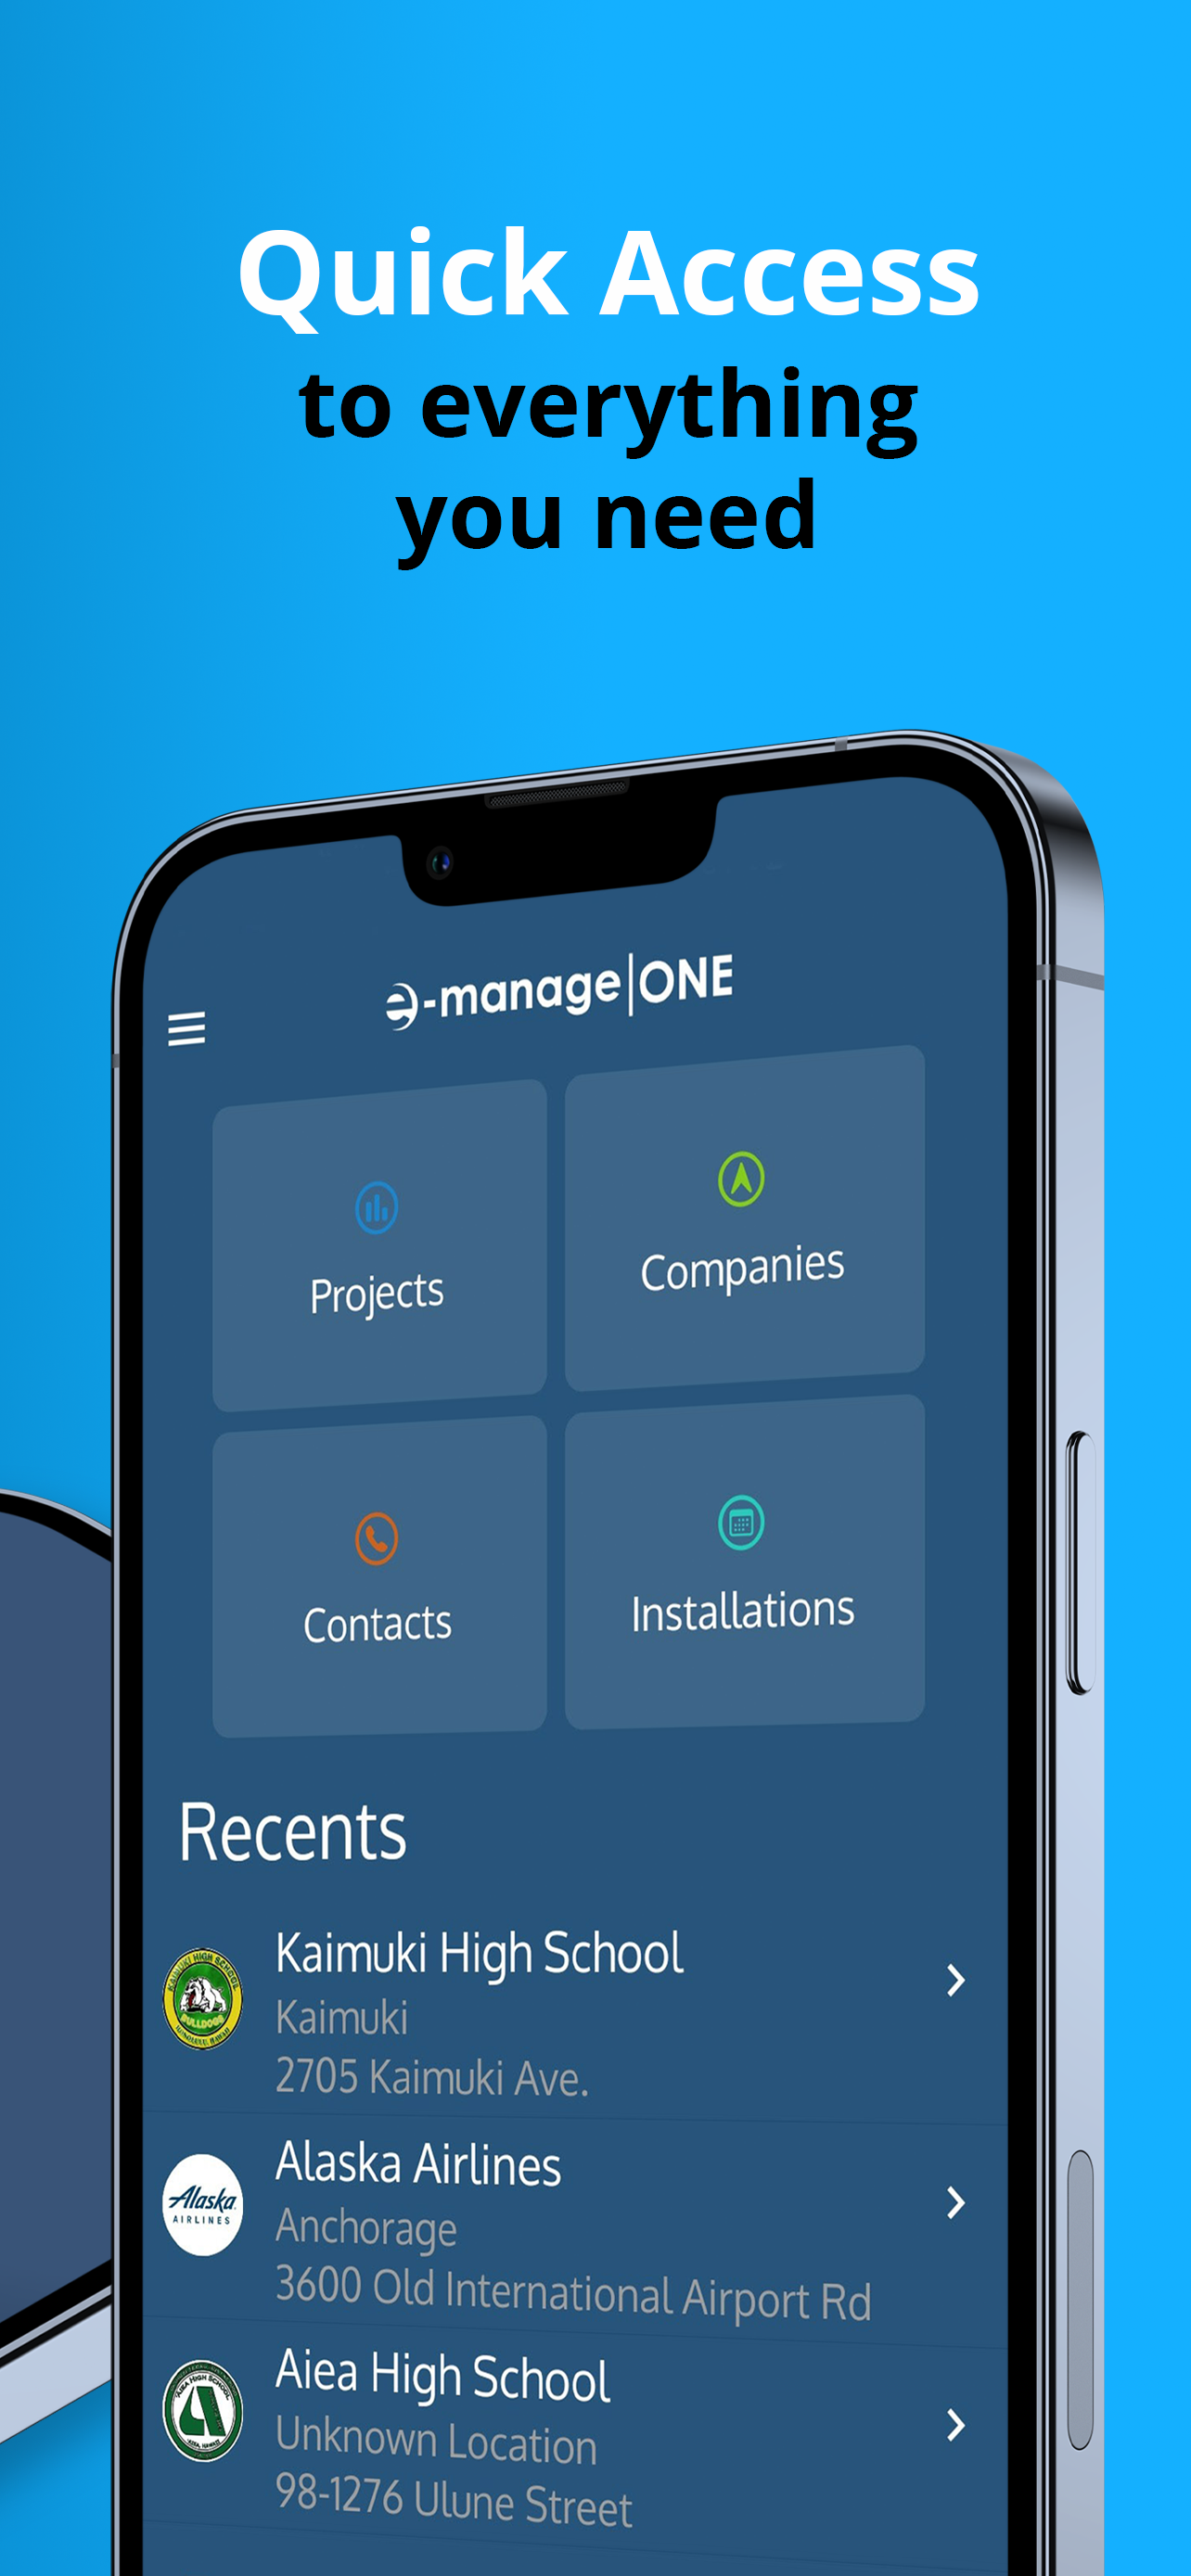 e-manageONE GO mobile app to connect teams in the field with the office.